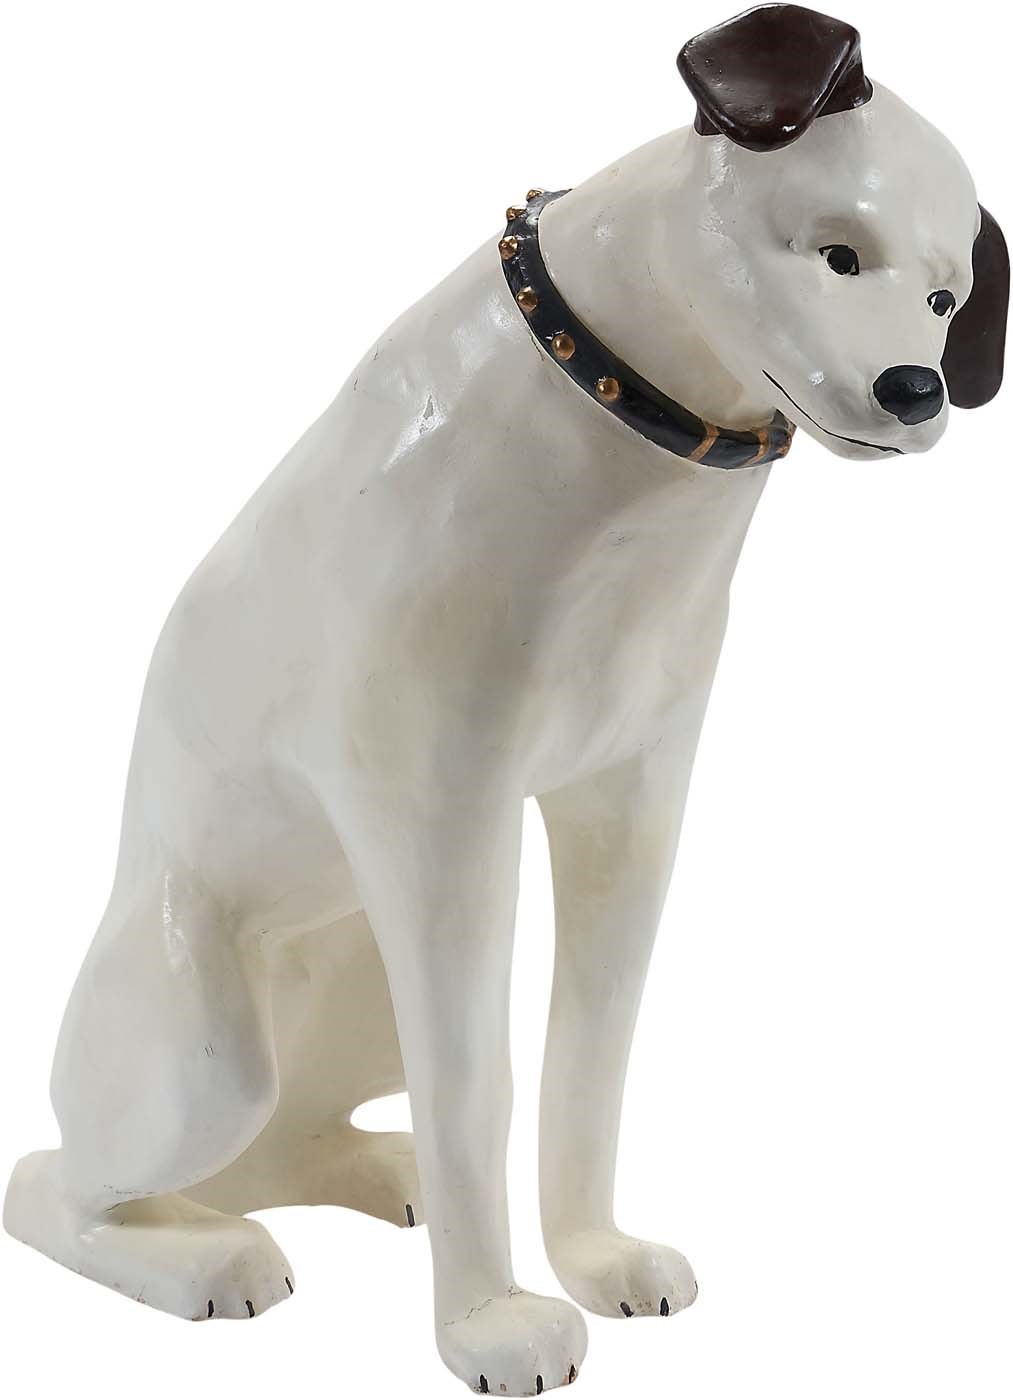 - 1930s "Nipper" RCA Victor Mascot Larger Than Life Store Display Advertising Statue (36" tall)